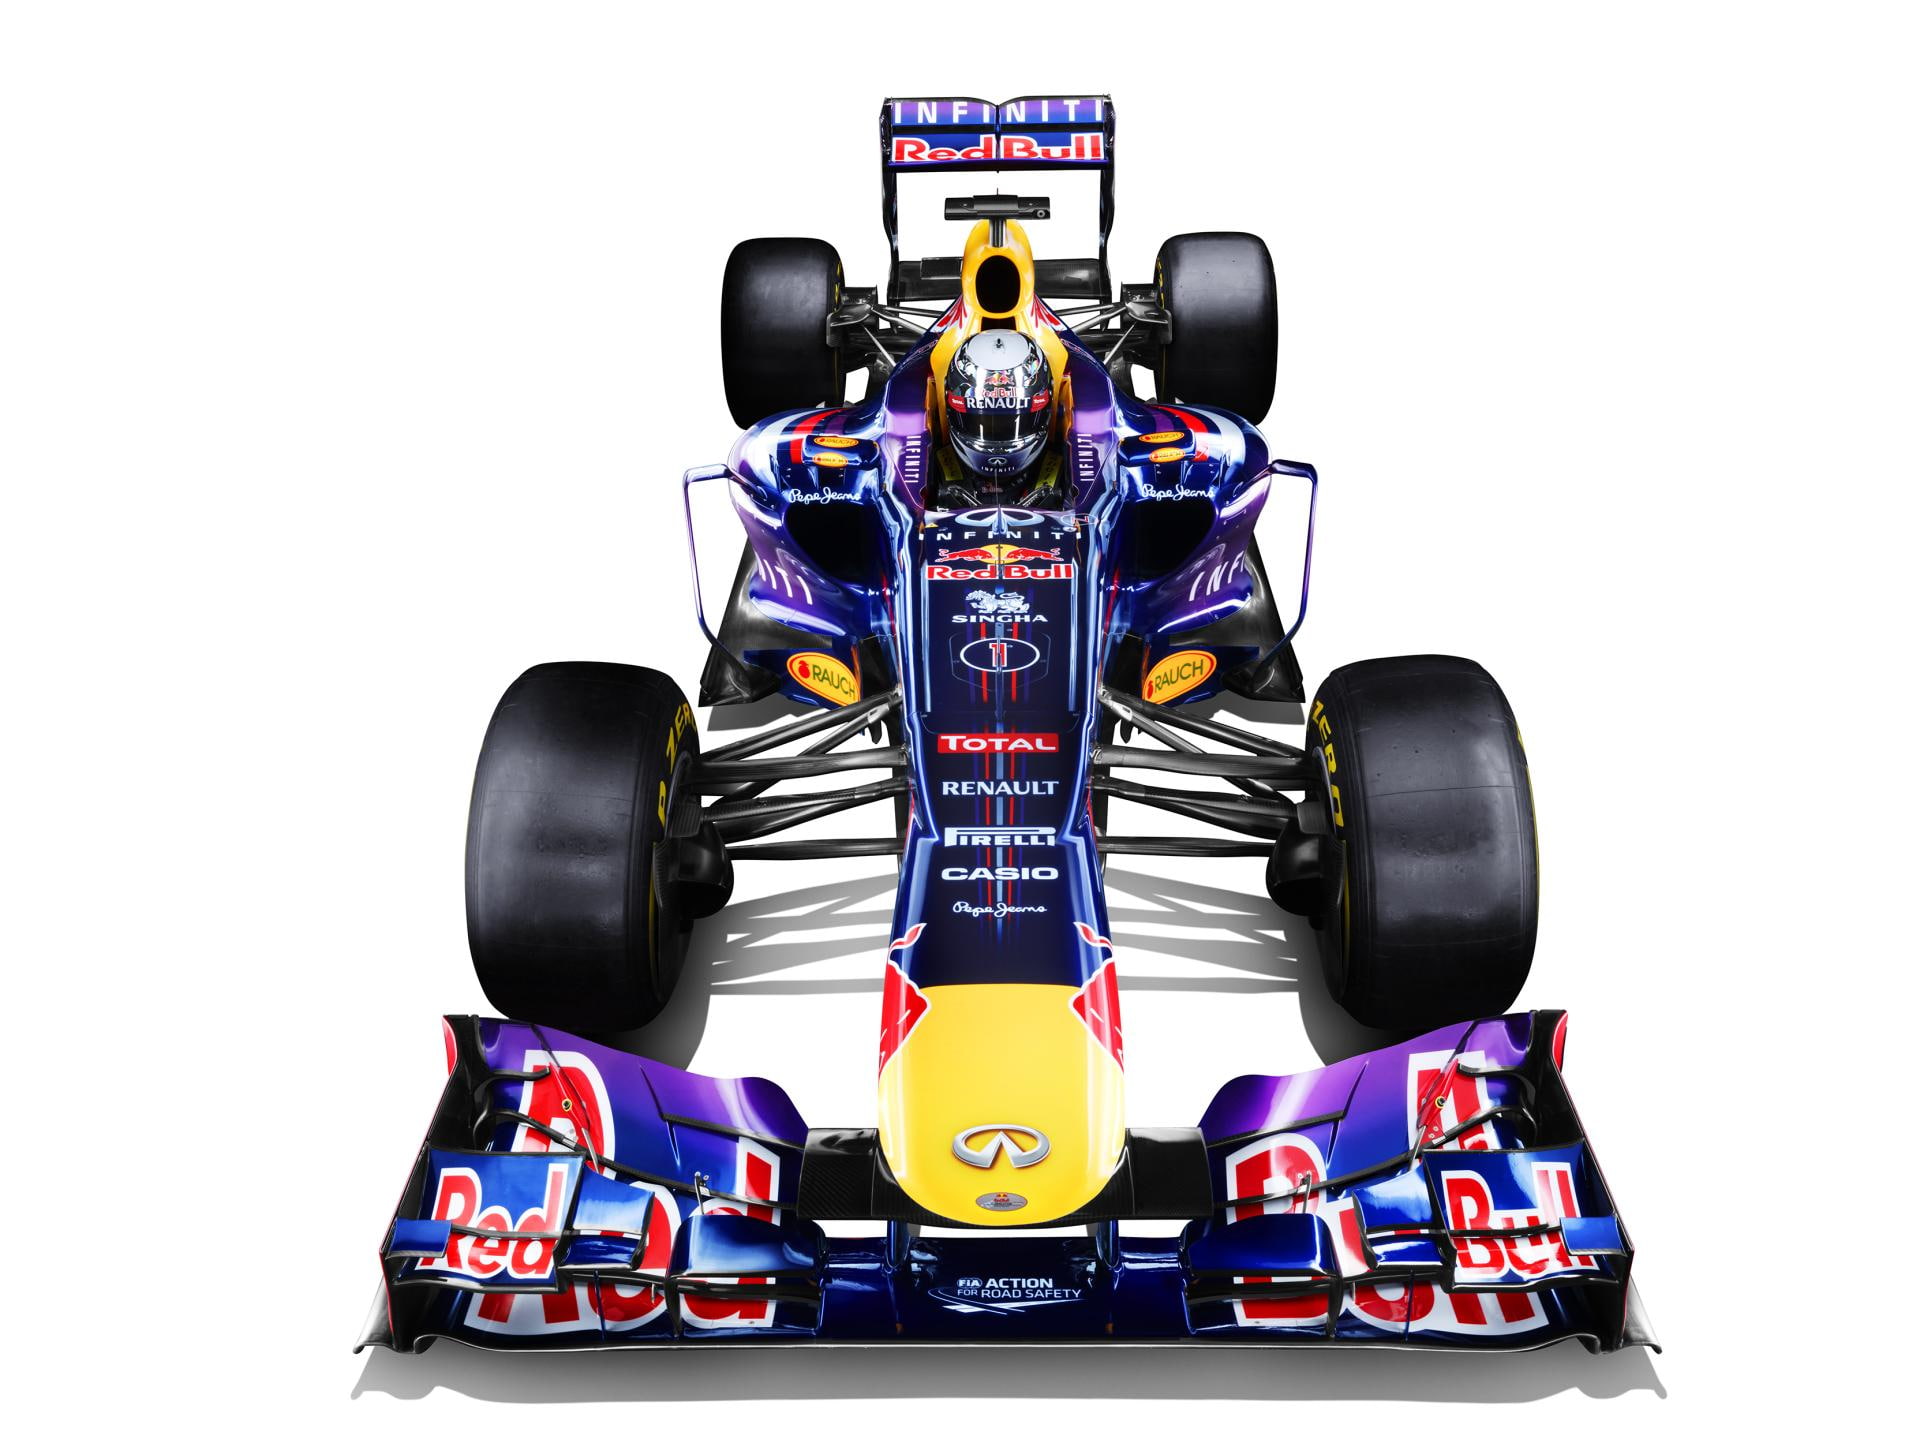 Red Bull RB9, red bull racing rb9 renault f1, car, white background